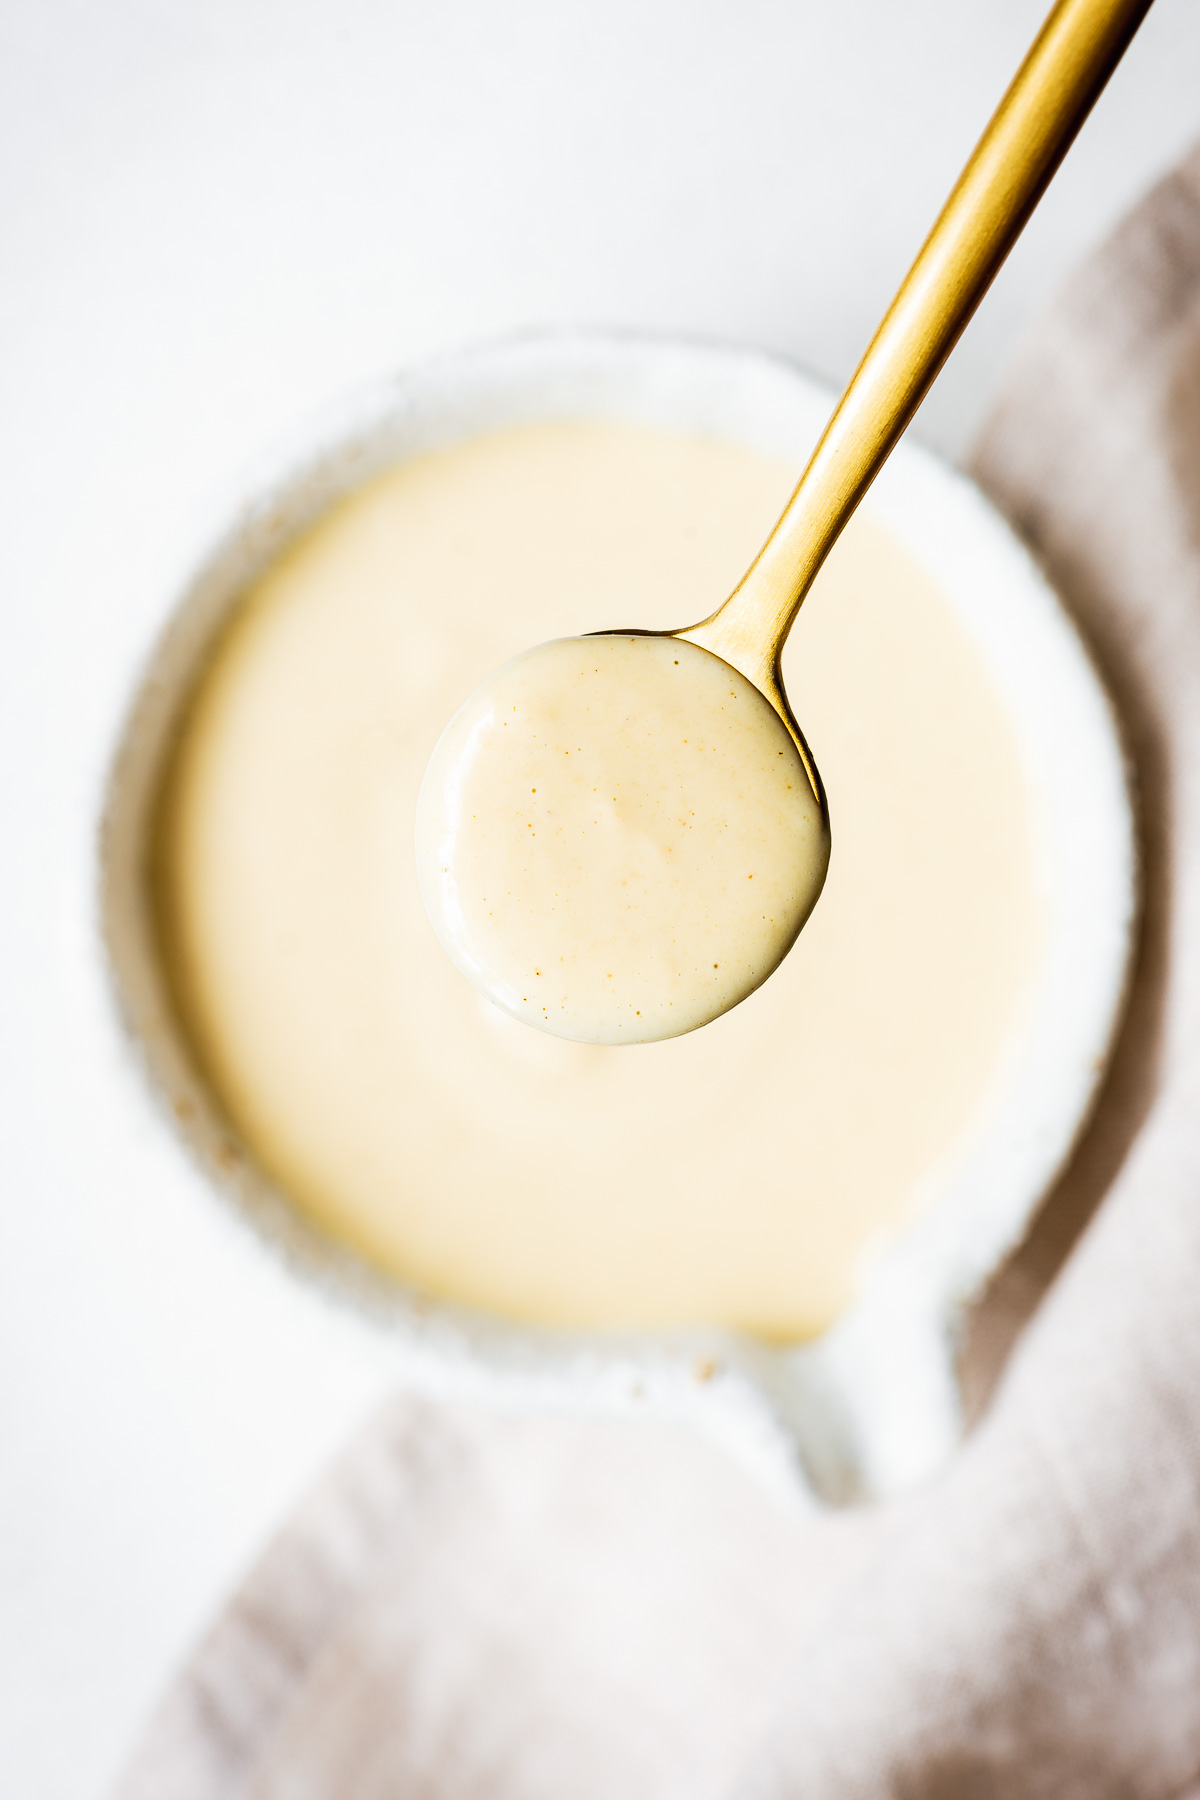 Creamy maple tahini dressing in a golden spoon viewed from above.